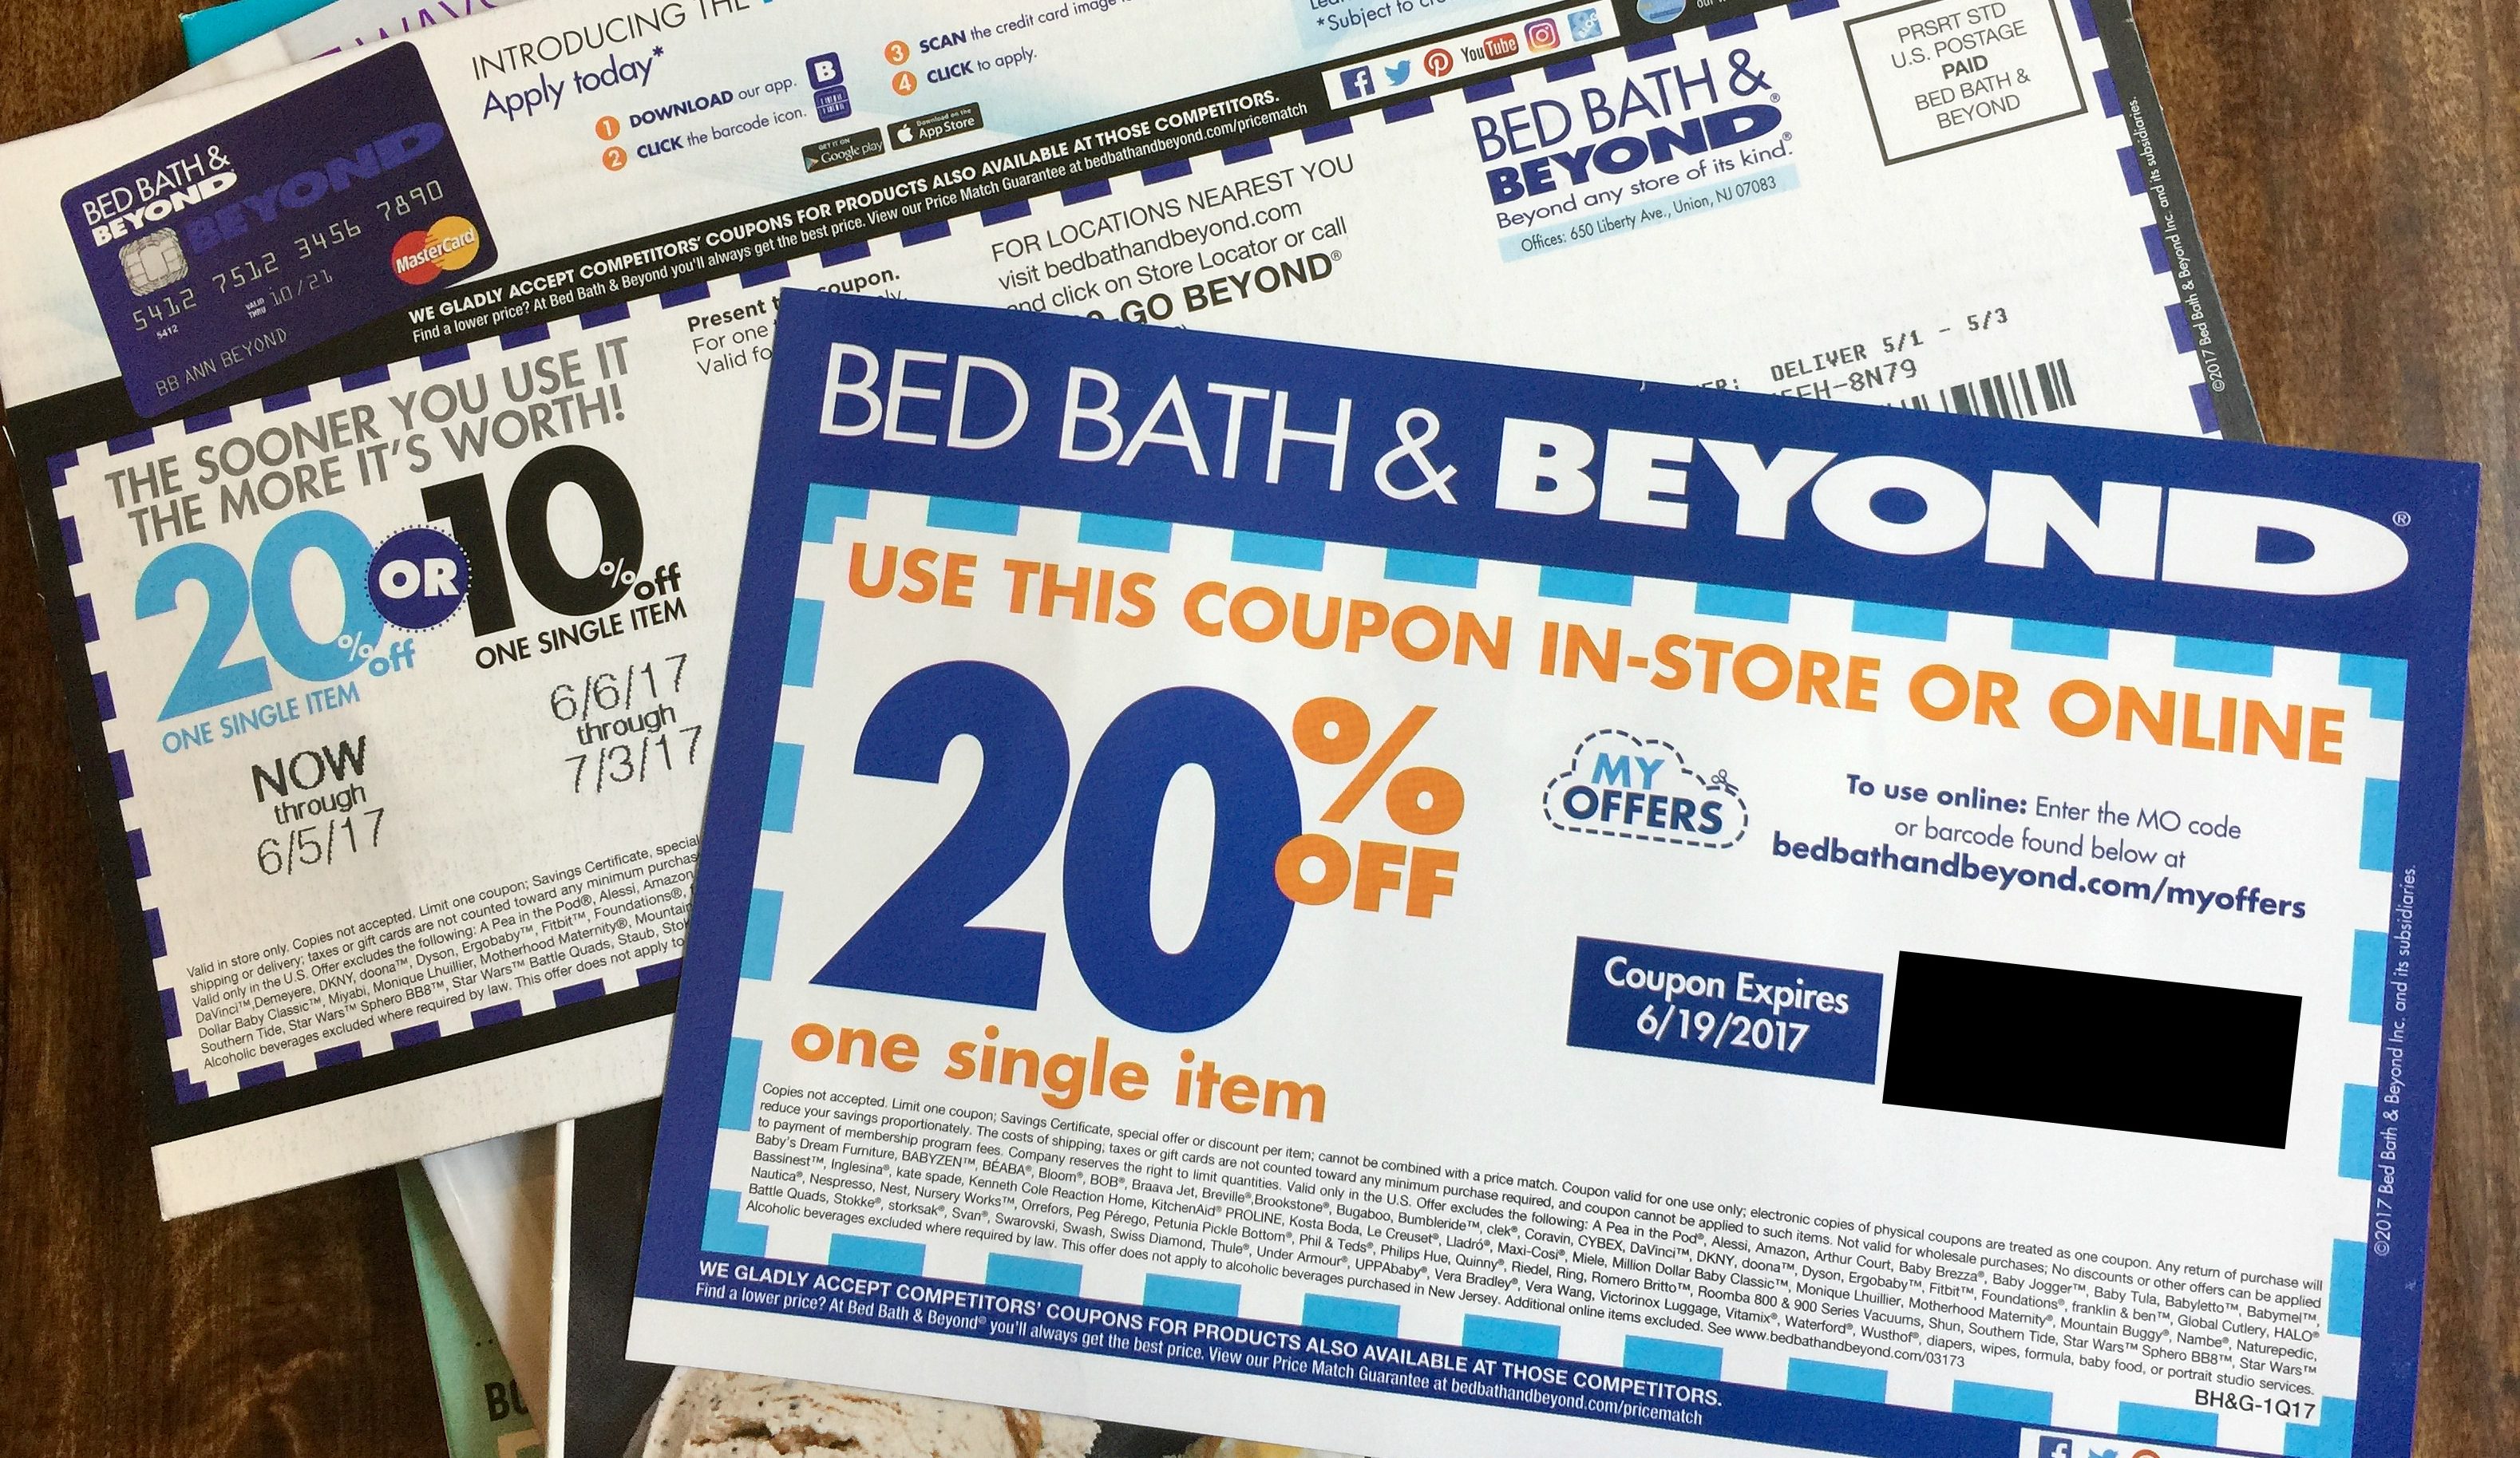 bed bath beyond coupon online purchase